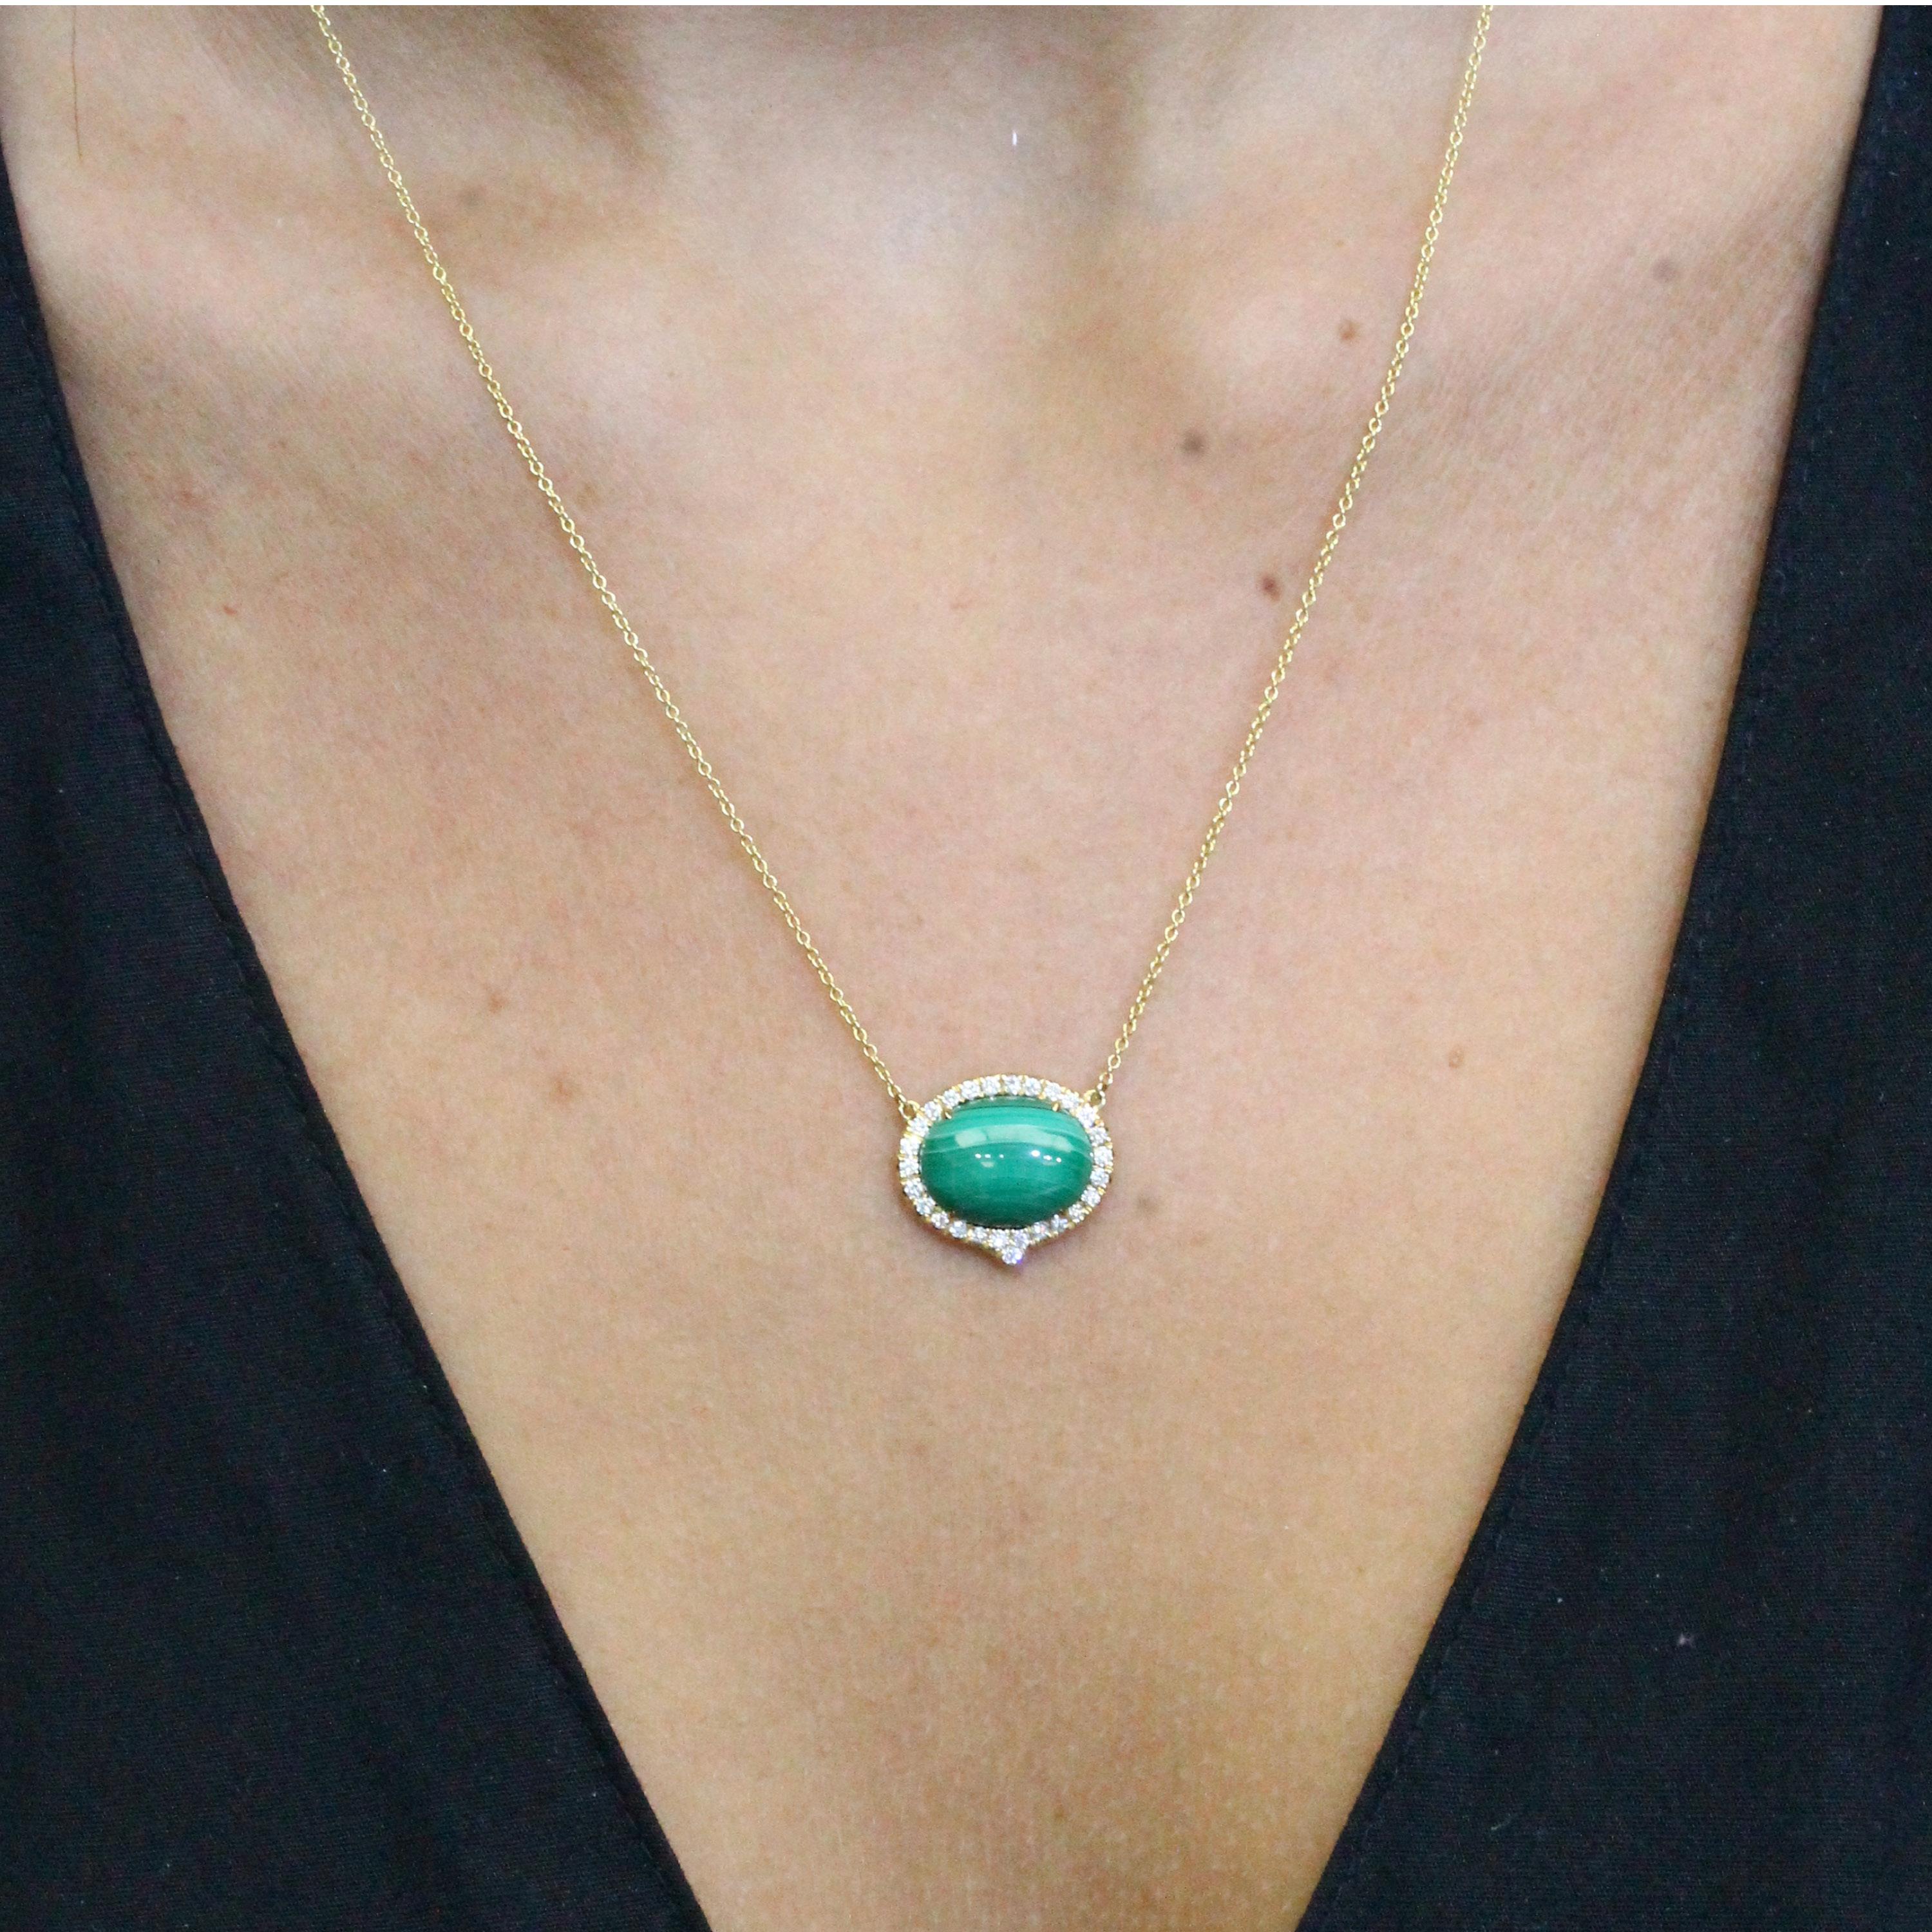 Art-Deco style Necklace featuring East-West Oval Cabochon Malachite, and diamond halo set in 18K yellow gold, hanging on an 18-inch Chain with 16-inch adjuster. Malachite is stone of balance and abundance, and often called 